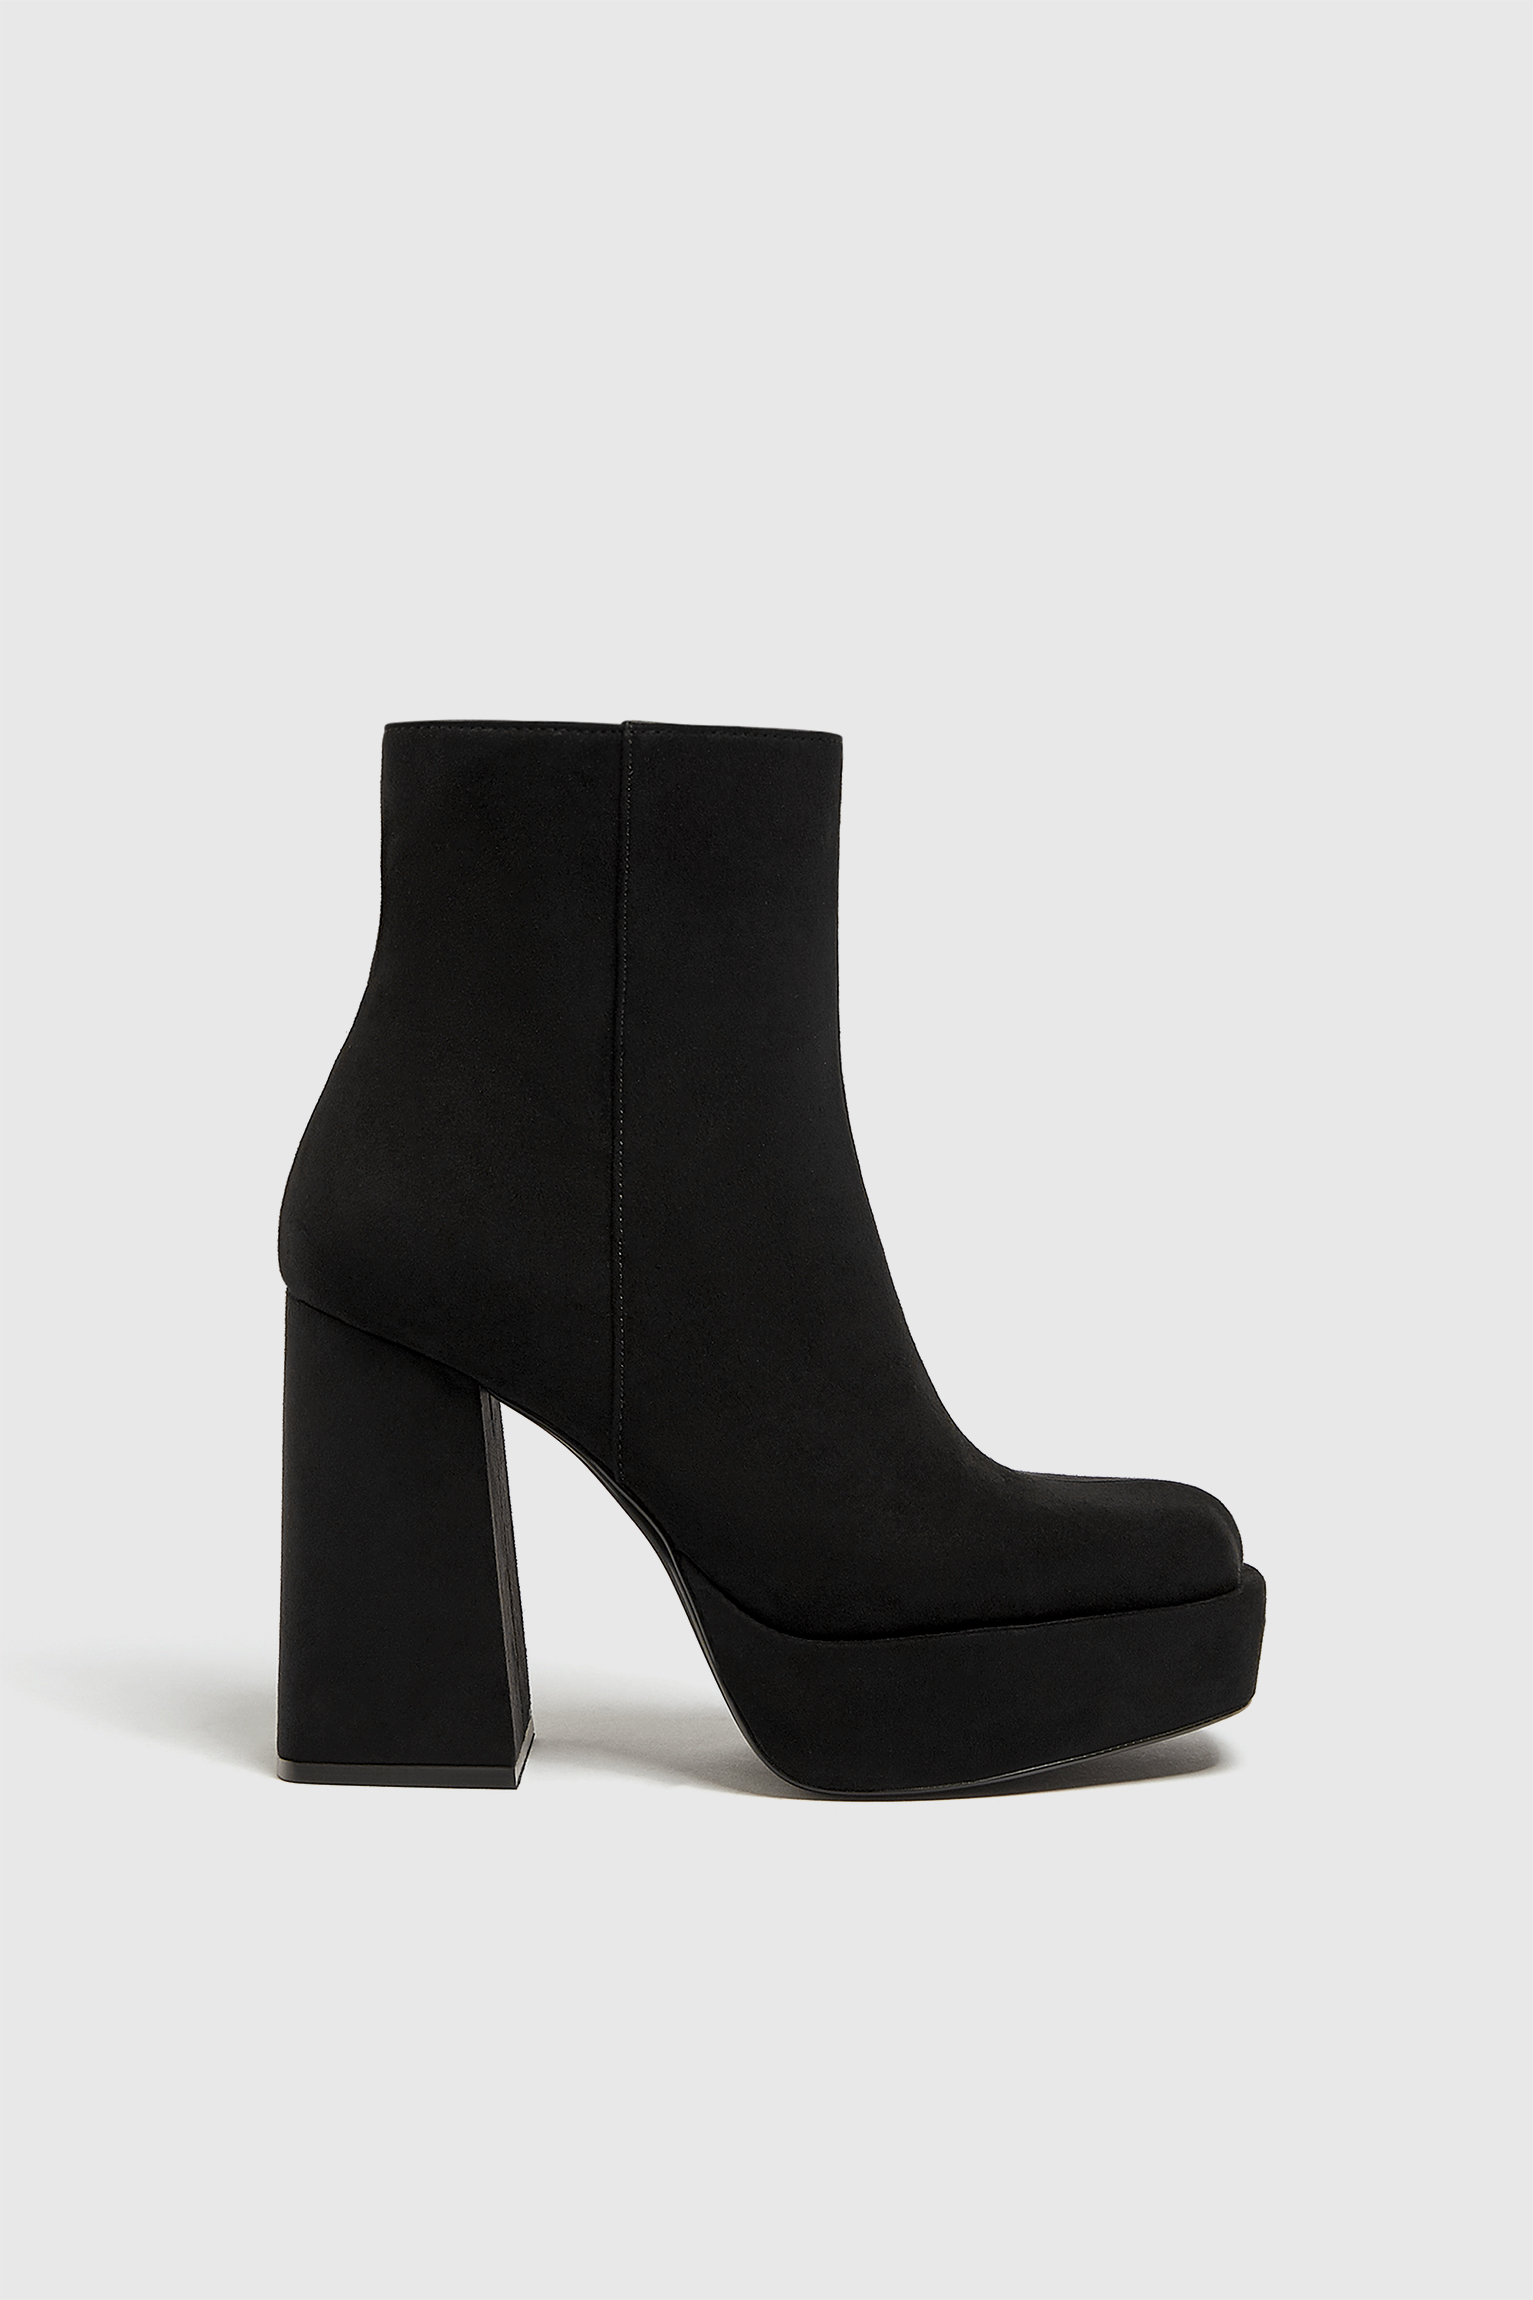 Women's Stiletto Ankle Boots & Booties | Nordstrom